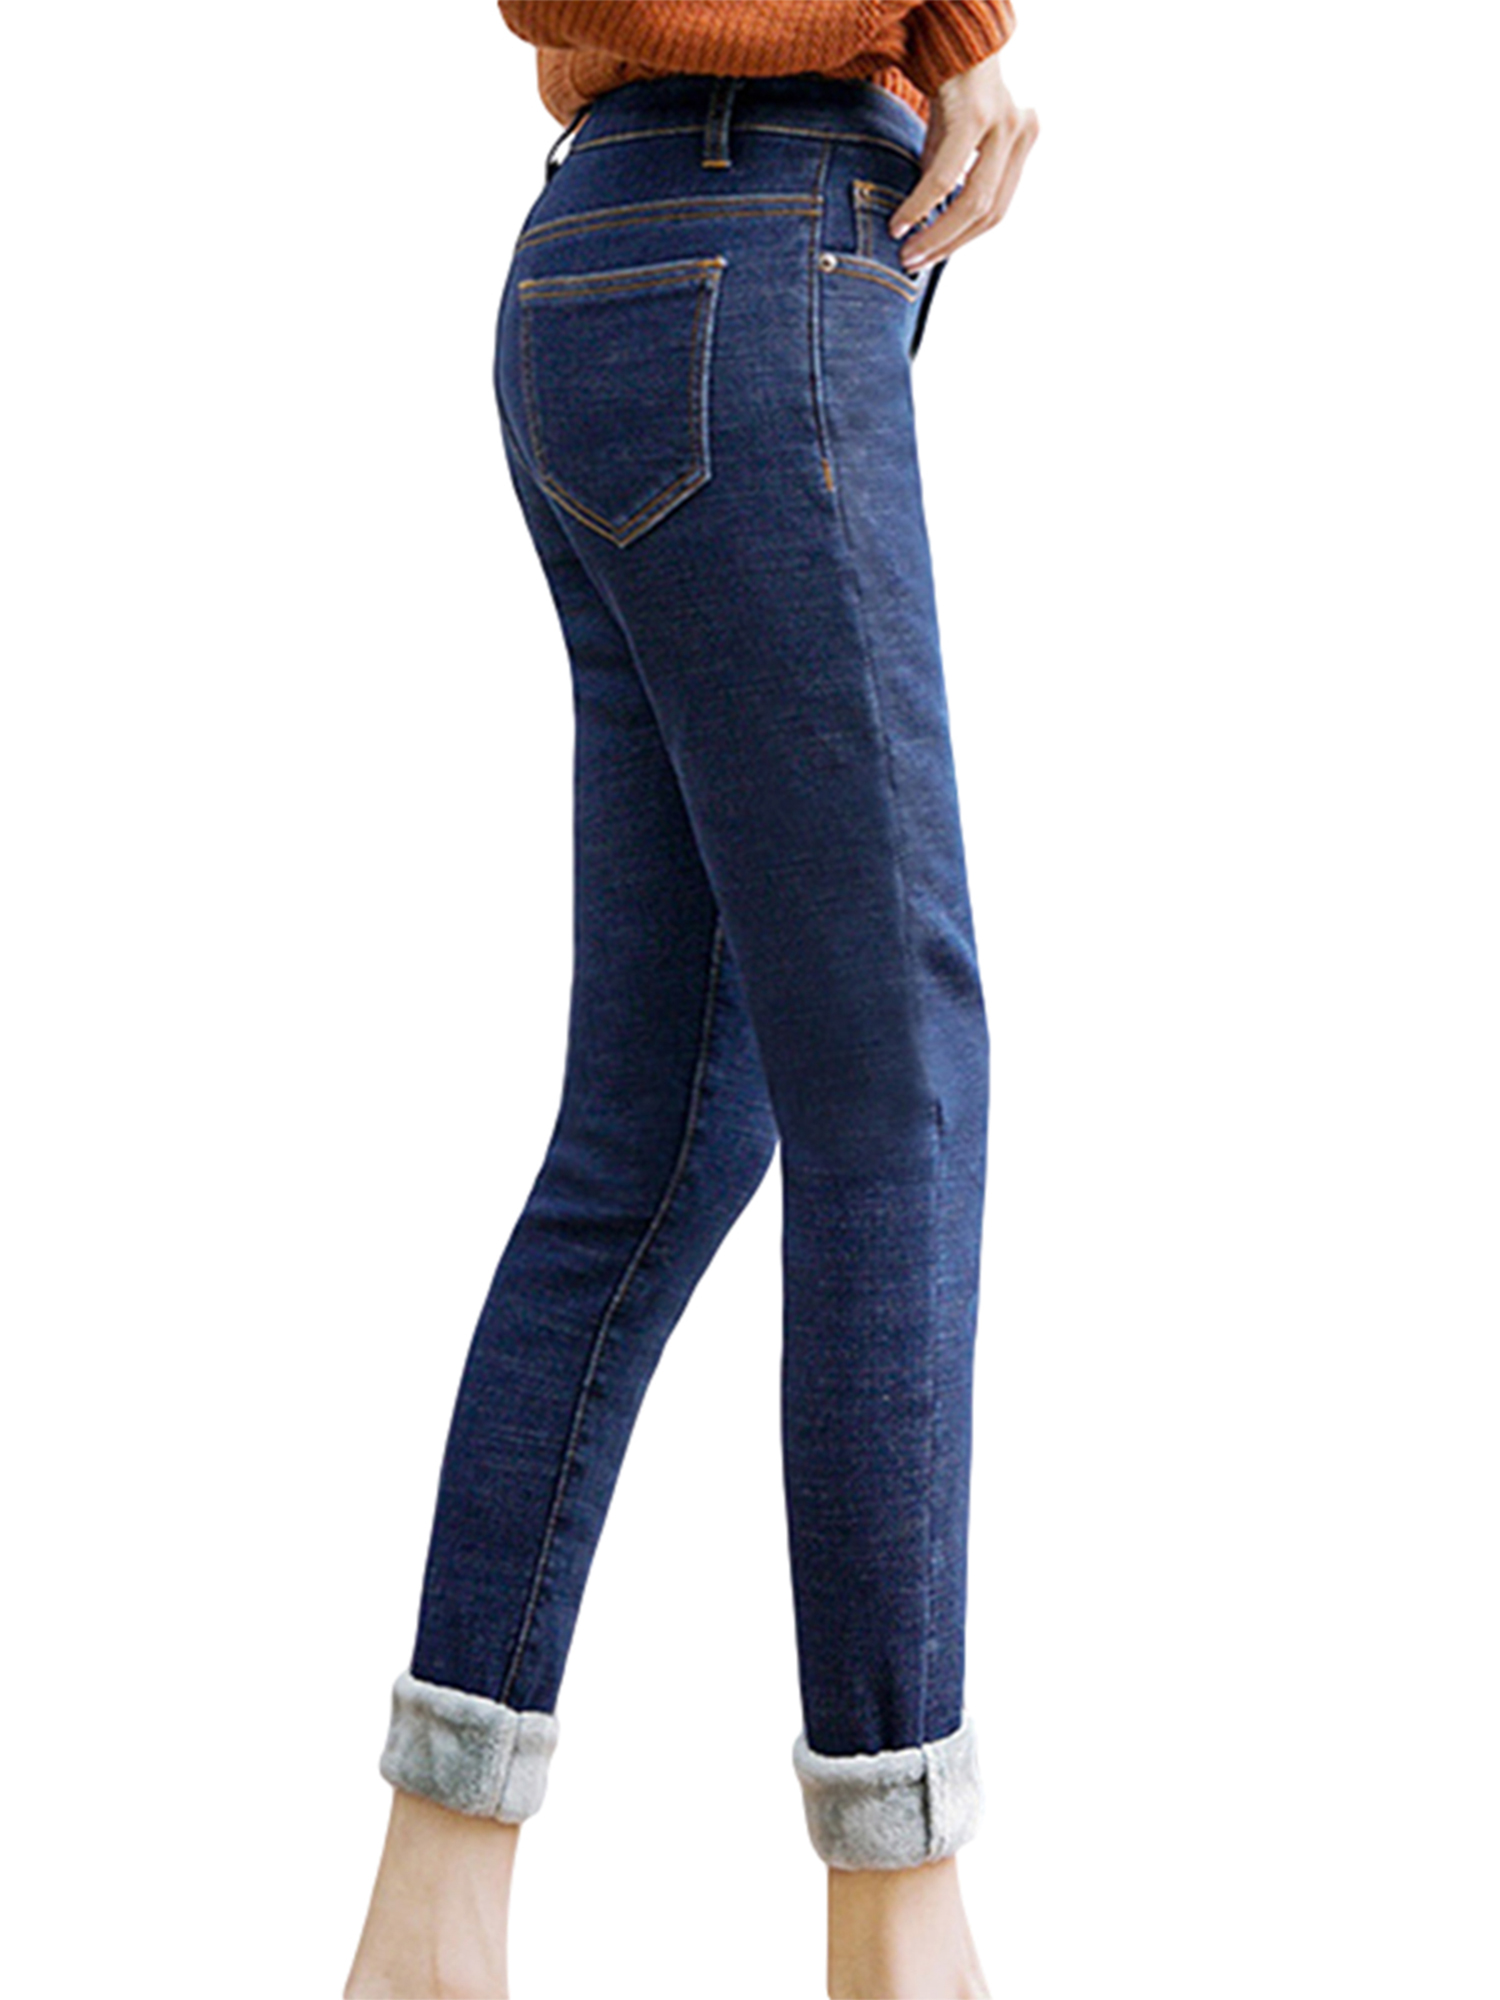 JBEELATE Women's Fleece Lined Jeans Stretchy Skinny Denim Pants with Pockets - image 3 of 6